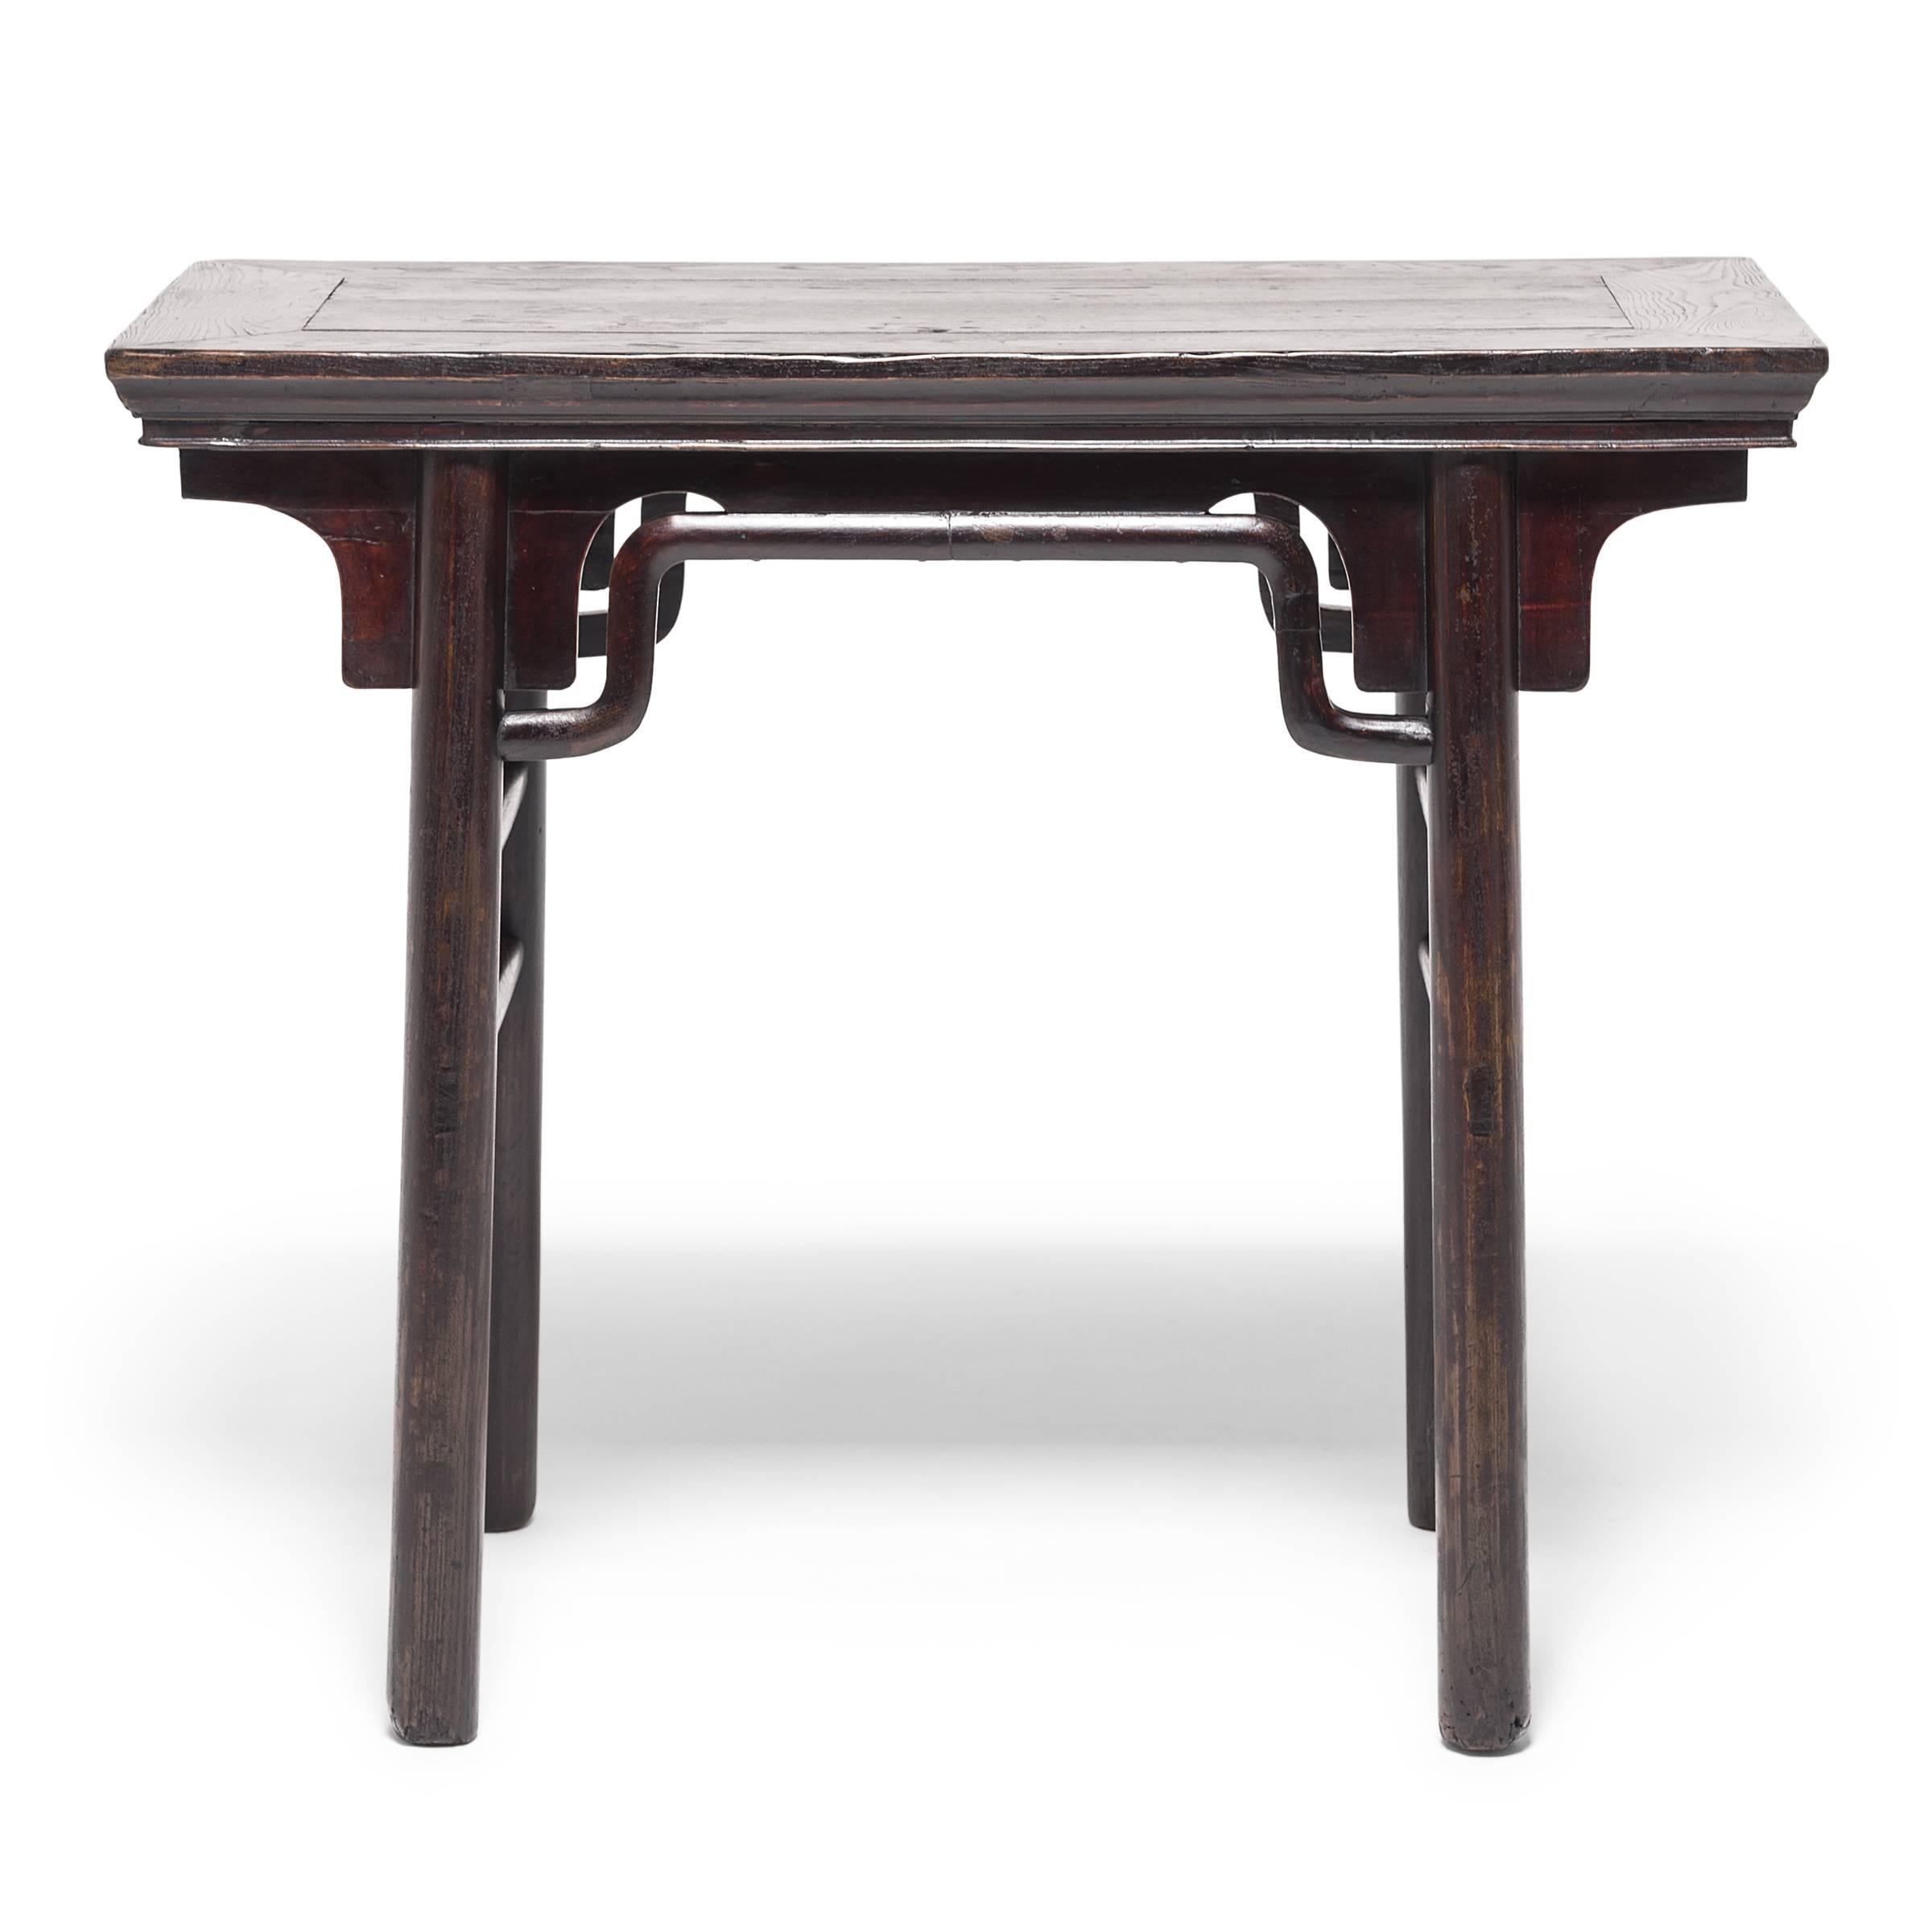 Chinese Petite Round Leg Wine Table, circa 1850 In Good Condition For Sale In Chicago, IL